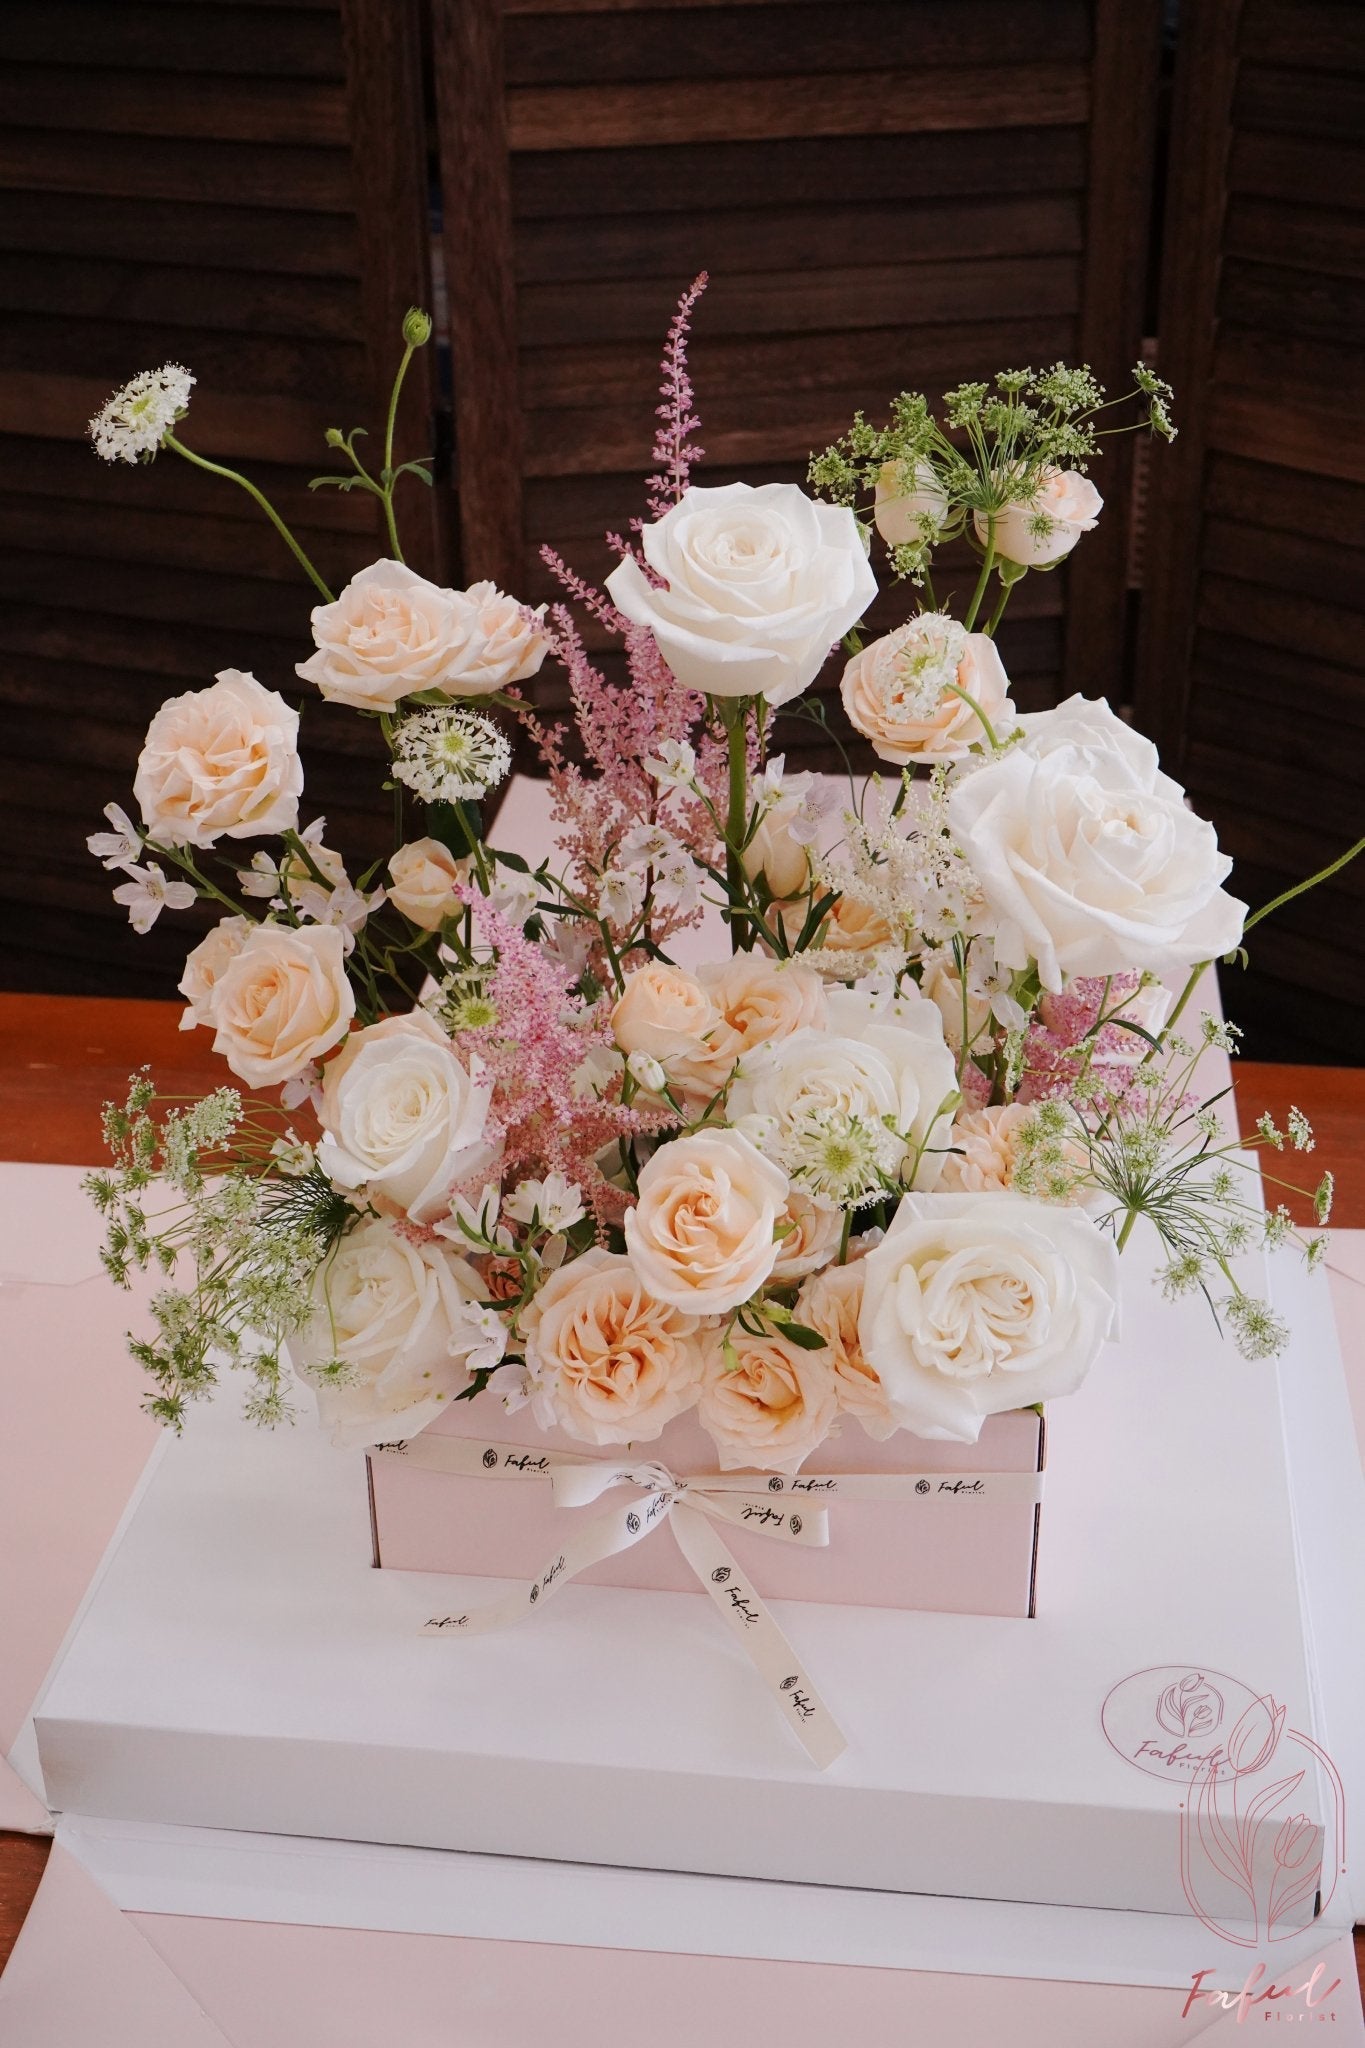 Champagne | White Rose - Fresh flowers, Roses- Champagne - Crystal Balloon 18 inch (+$200) - Feather - Surprise Box - - 4